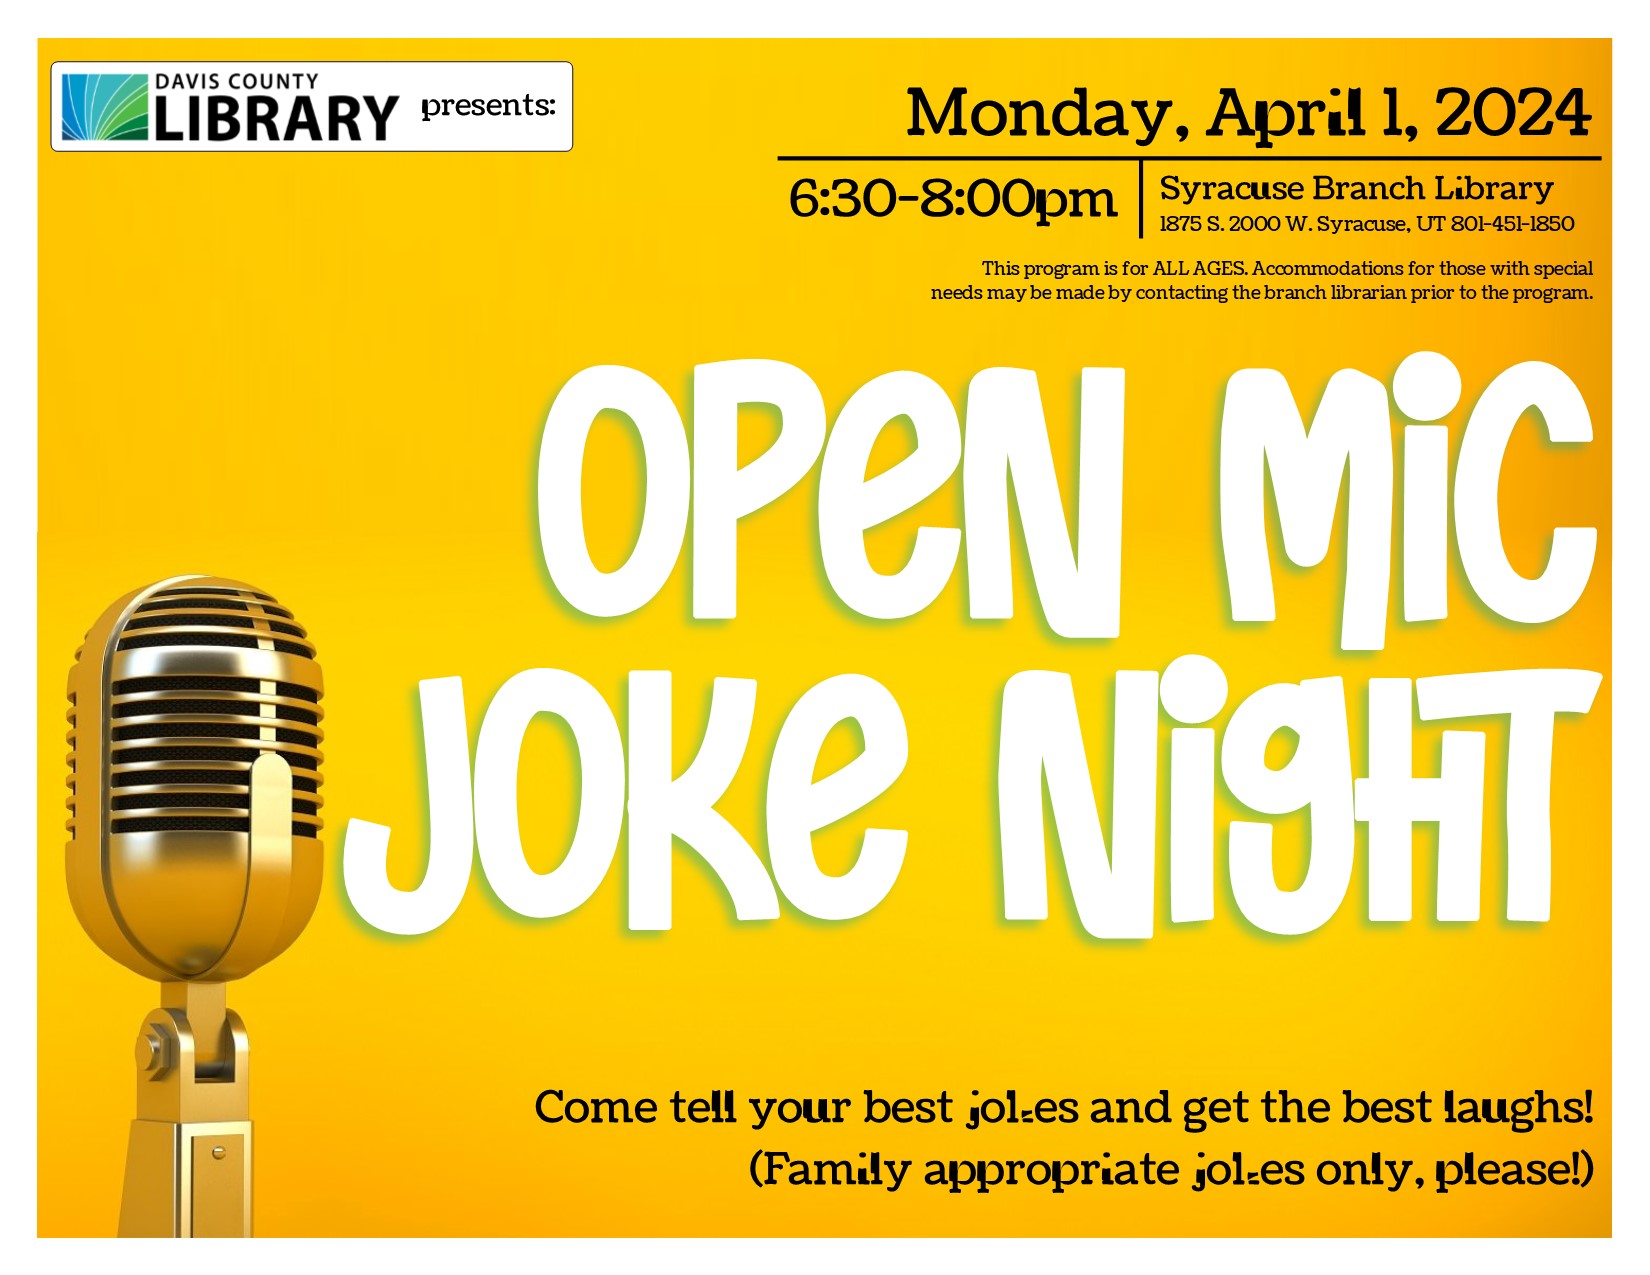 Open Mic Joke Night! Come tell your best jokes and get the best laughs! (Family appropriate jokes only, please!)